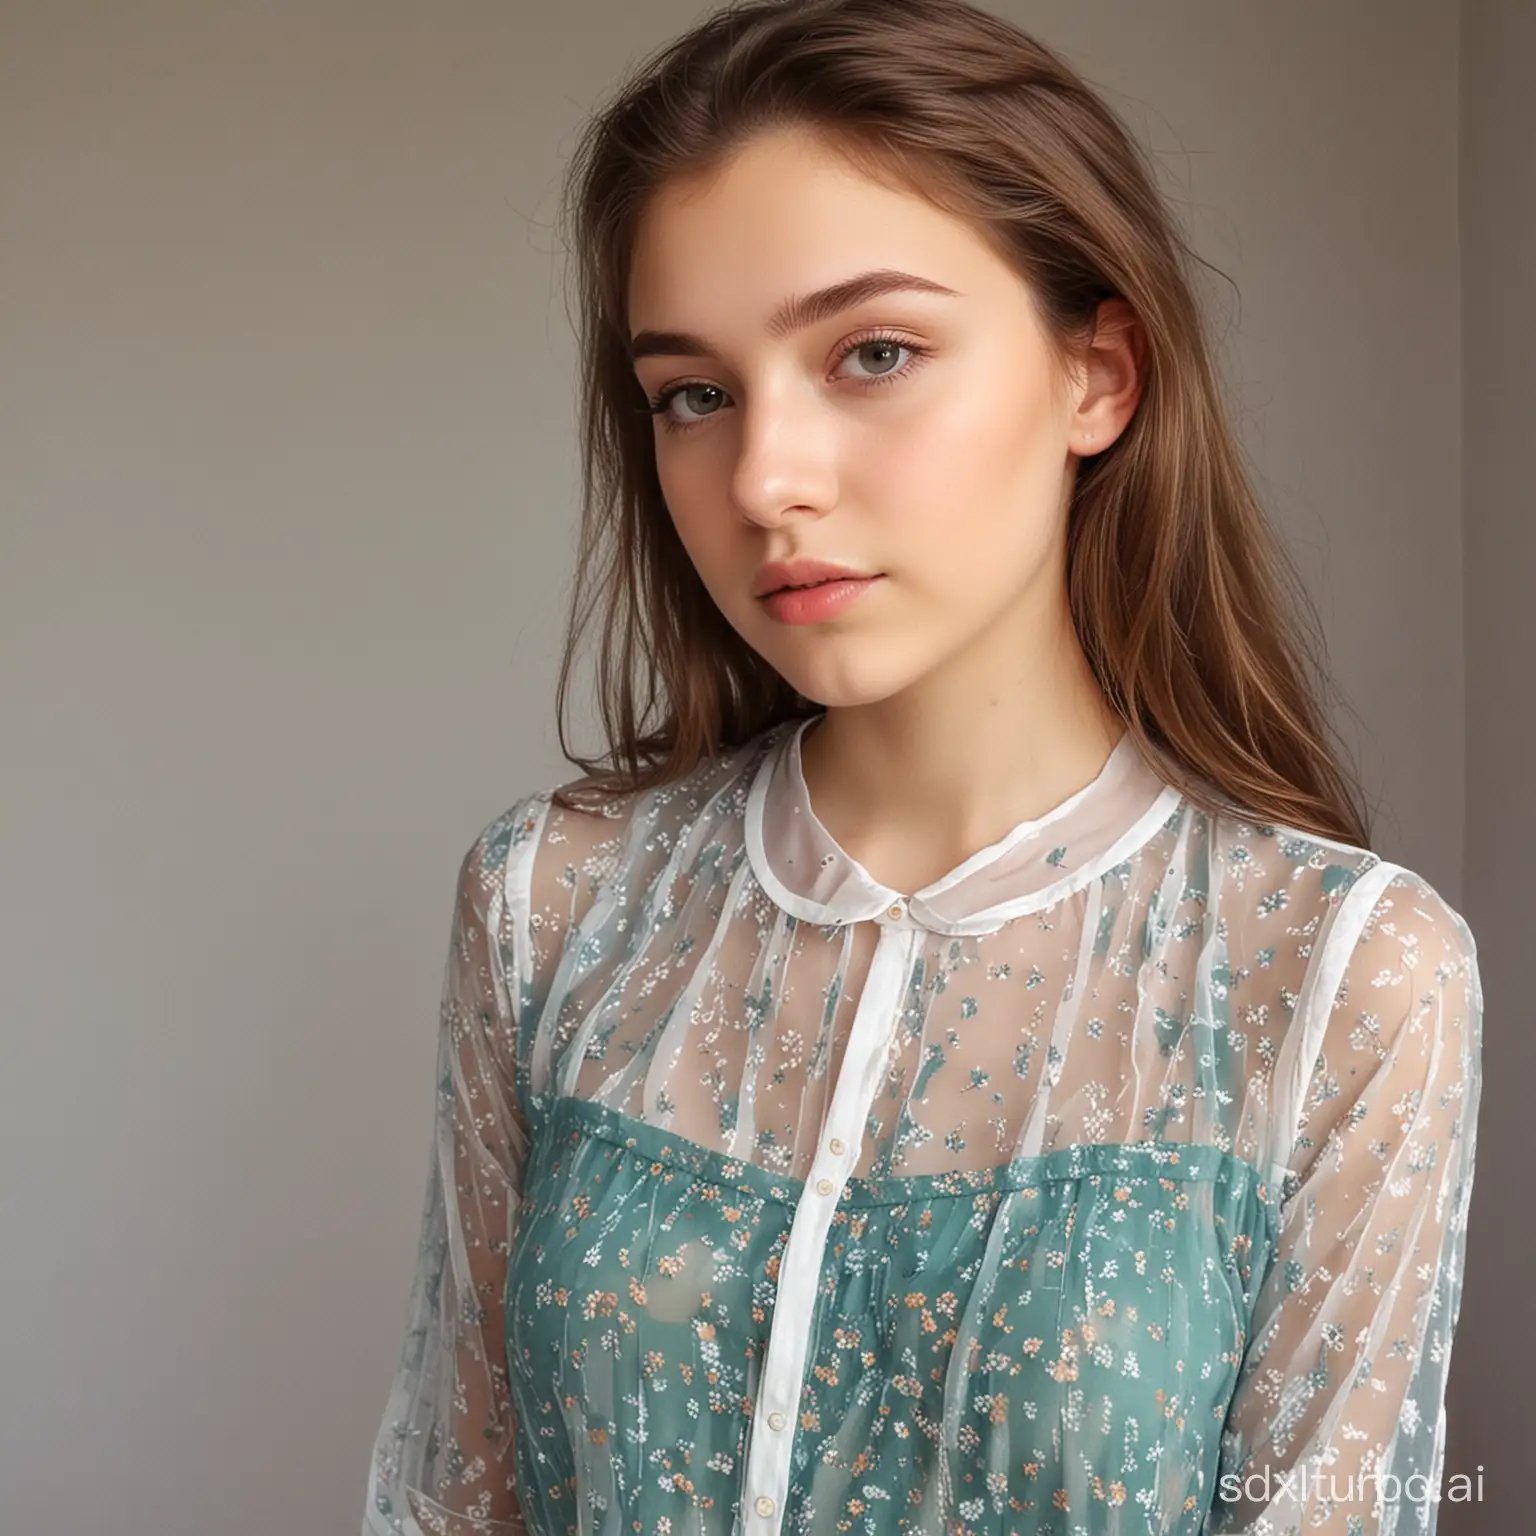 A beautiful teen with a see through blouse